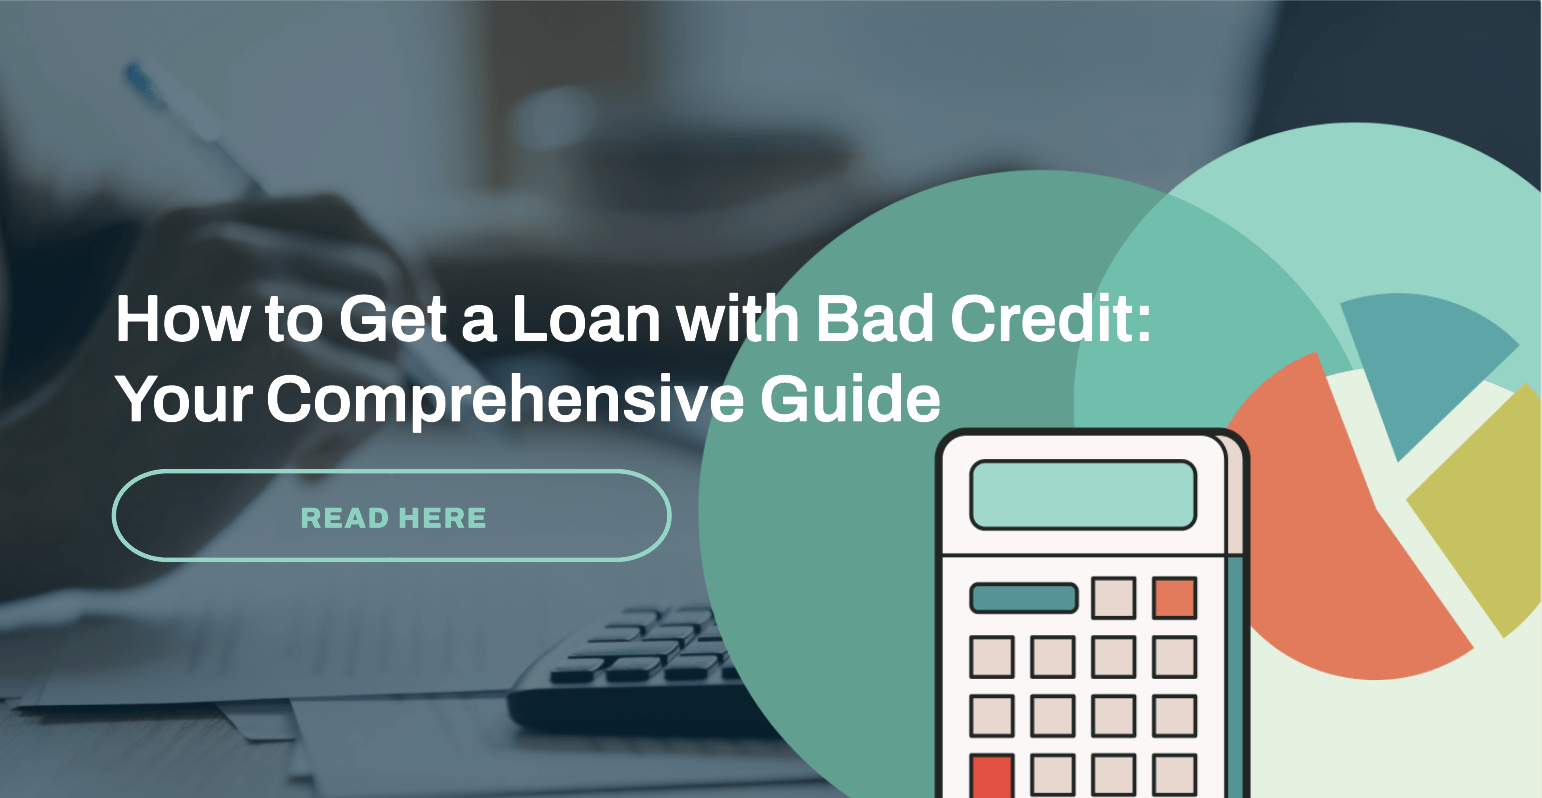 Get a Loan with Bad Credit